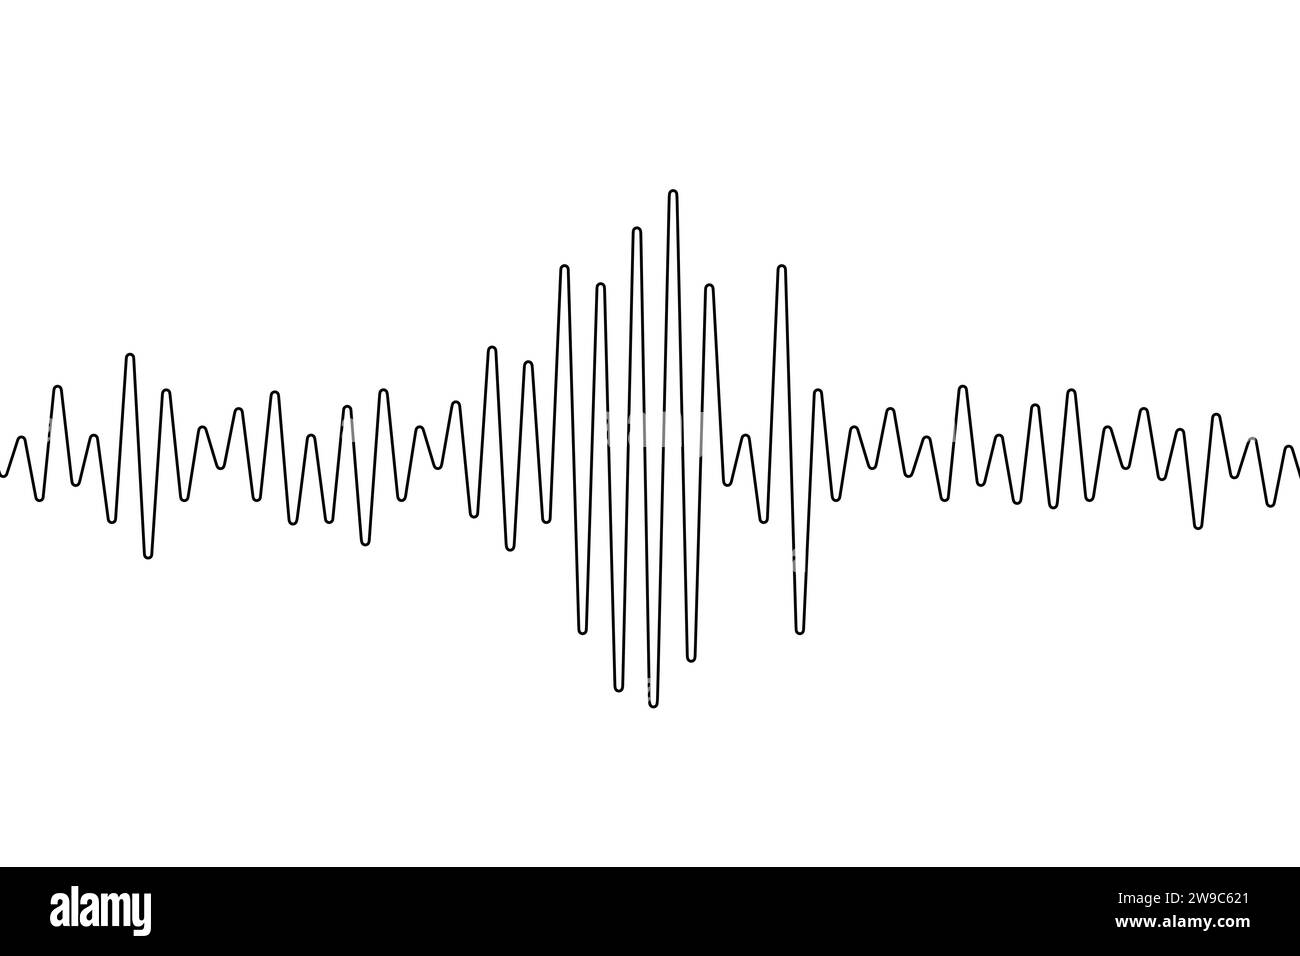 Earthquake one continuous line. Polygraph single line art. Outline wave. Black waves pattern isolated on white background. Oneline seismograph. Sound Stock Vector